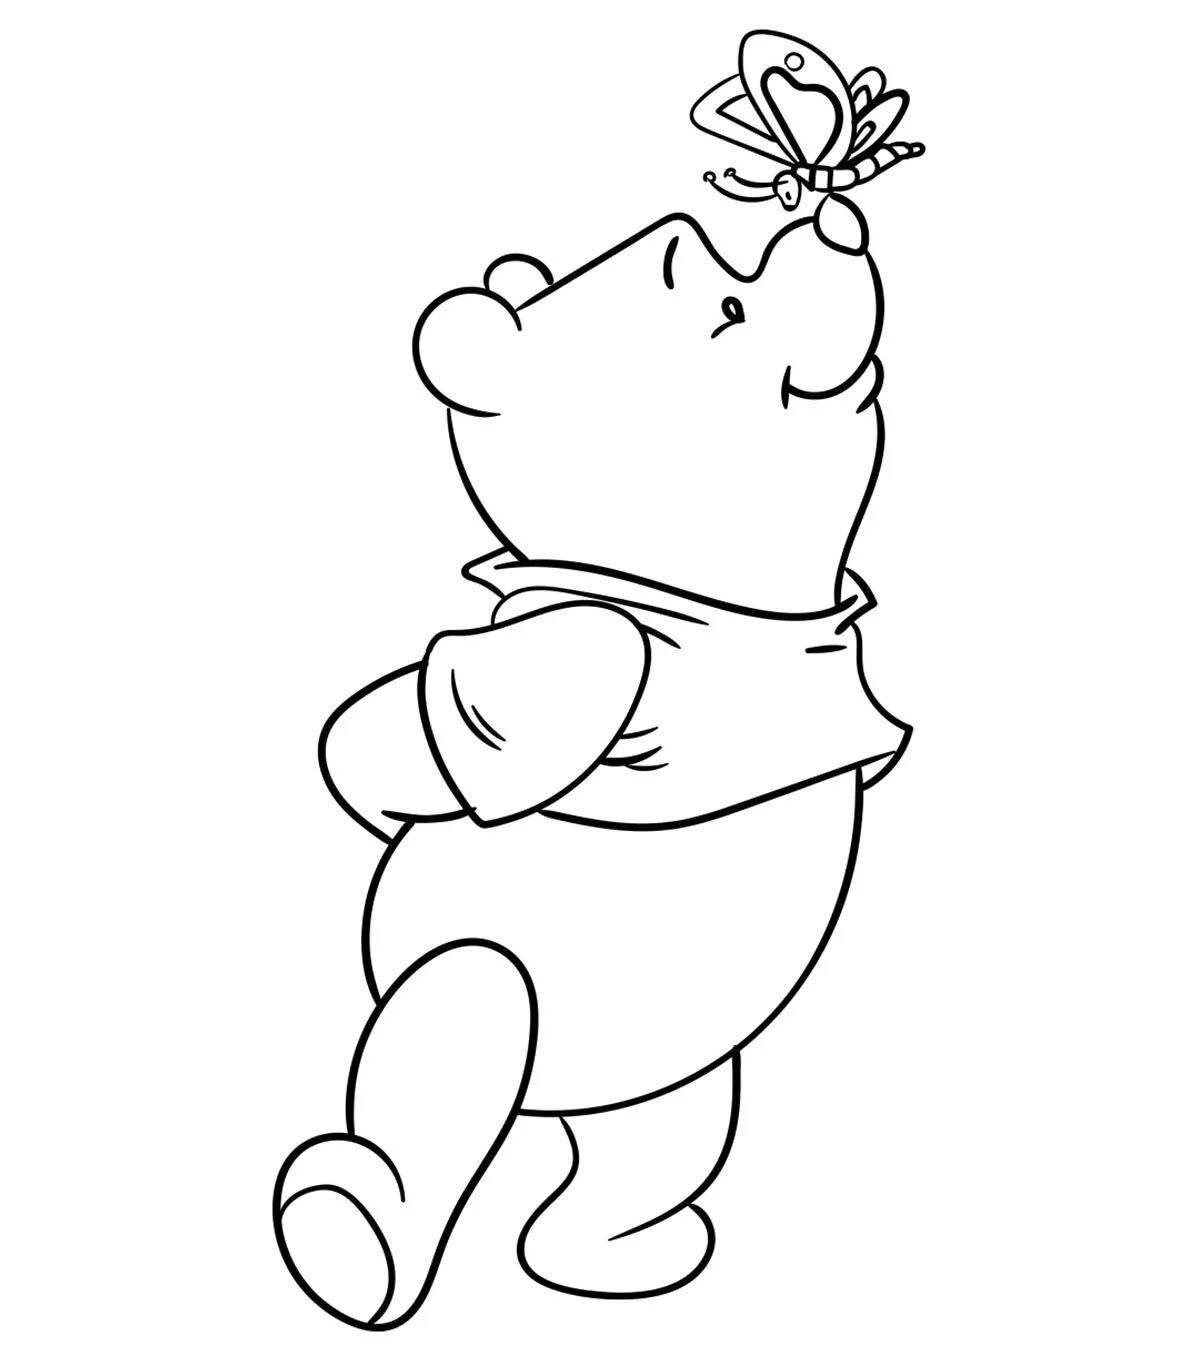 Colorful winnie the pooh coloring book